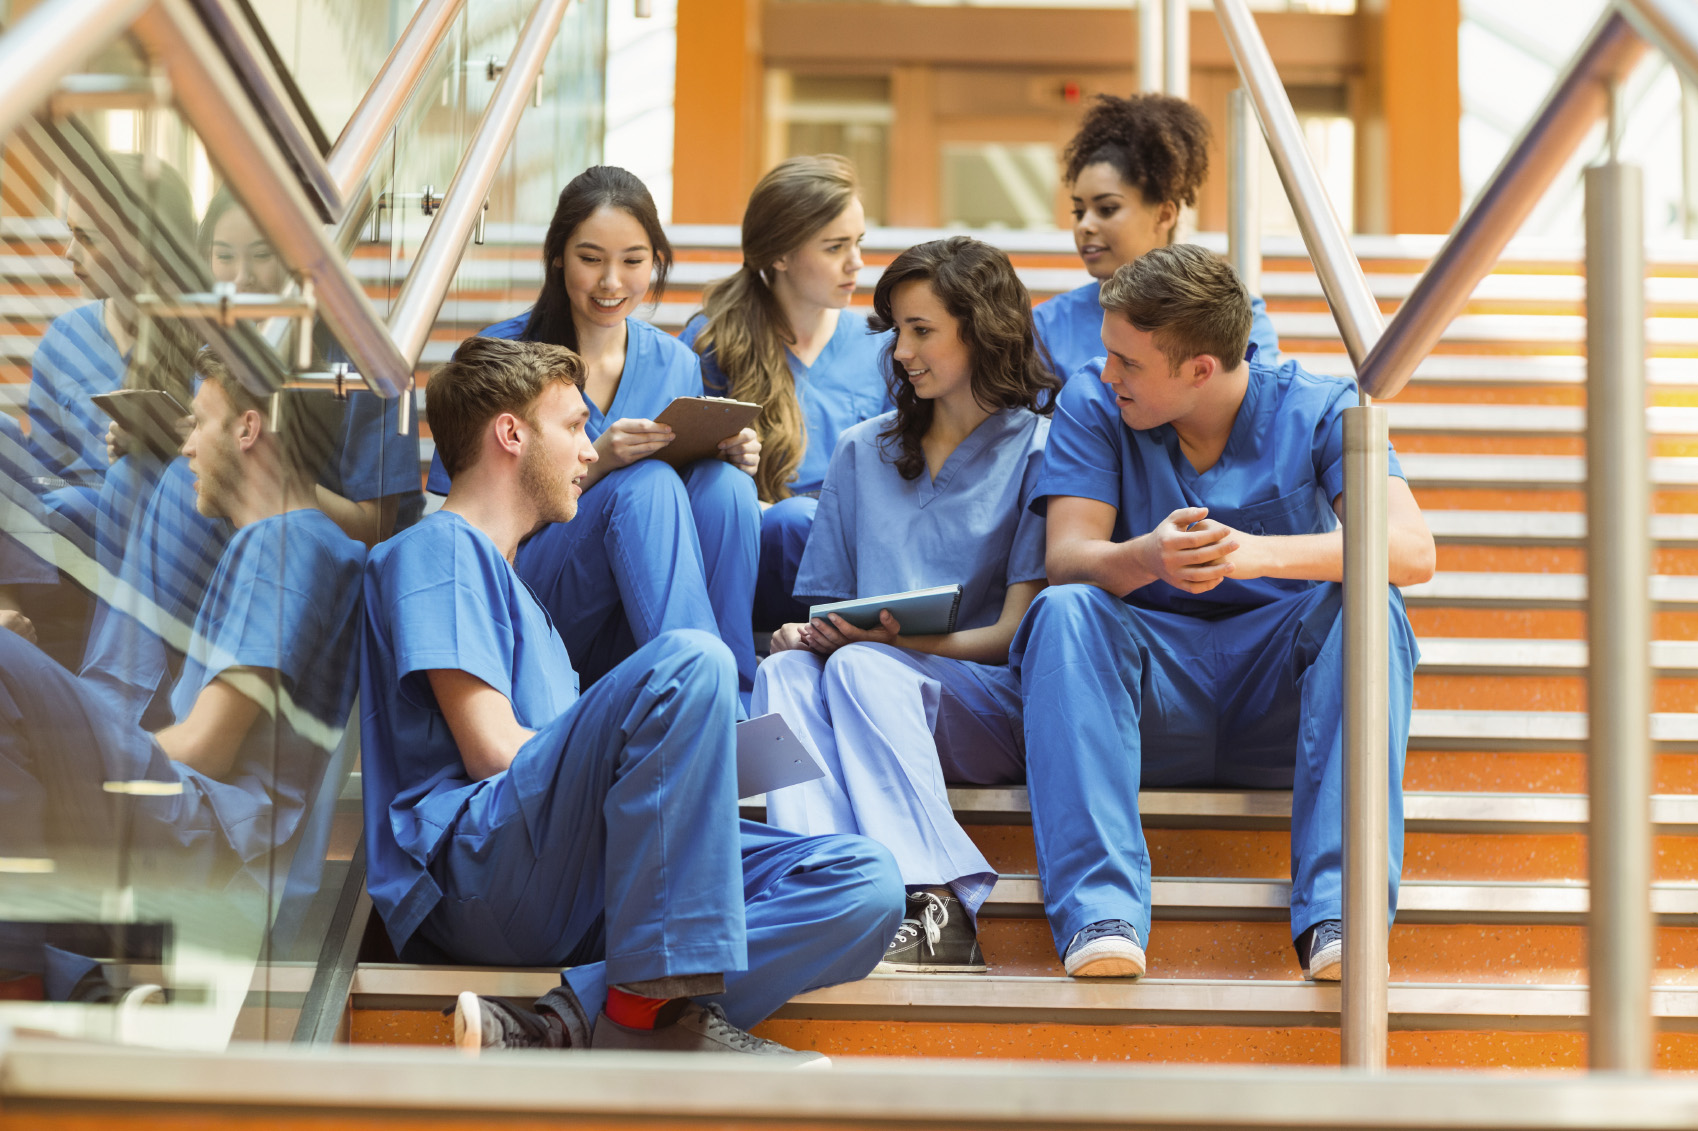 Education and Performance of Care Staffing Professionals